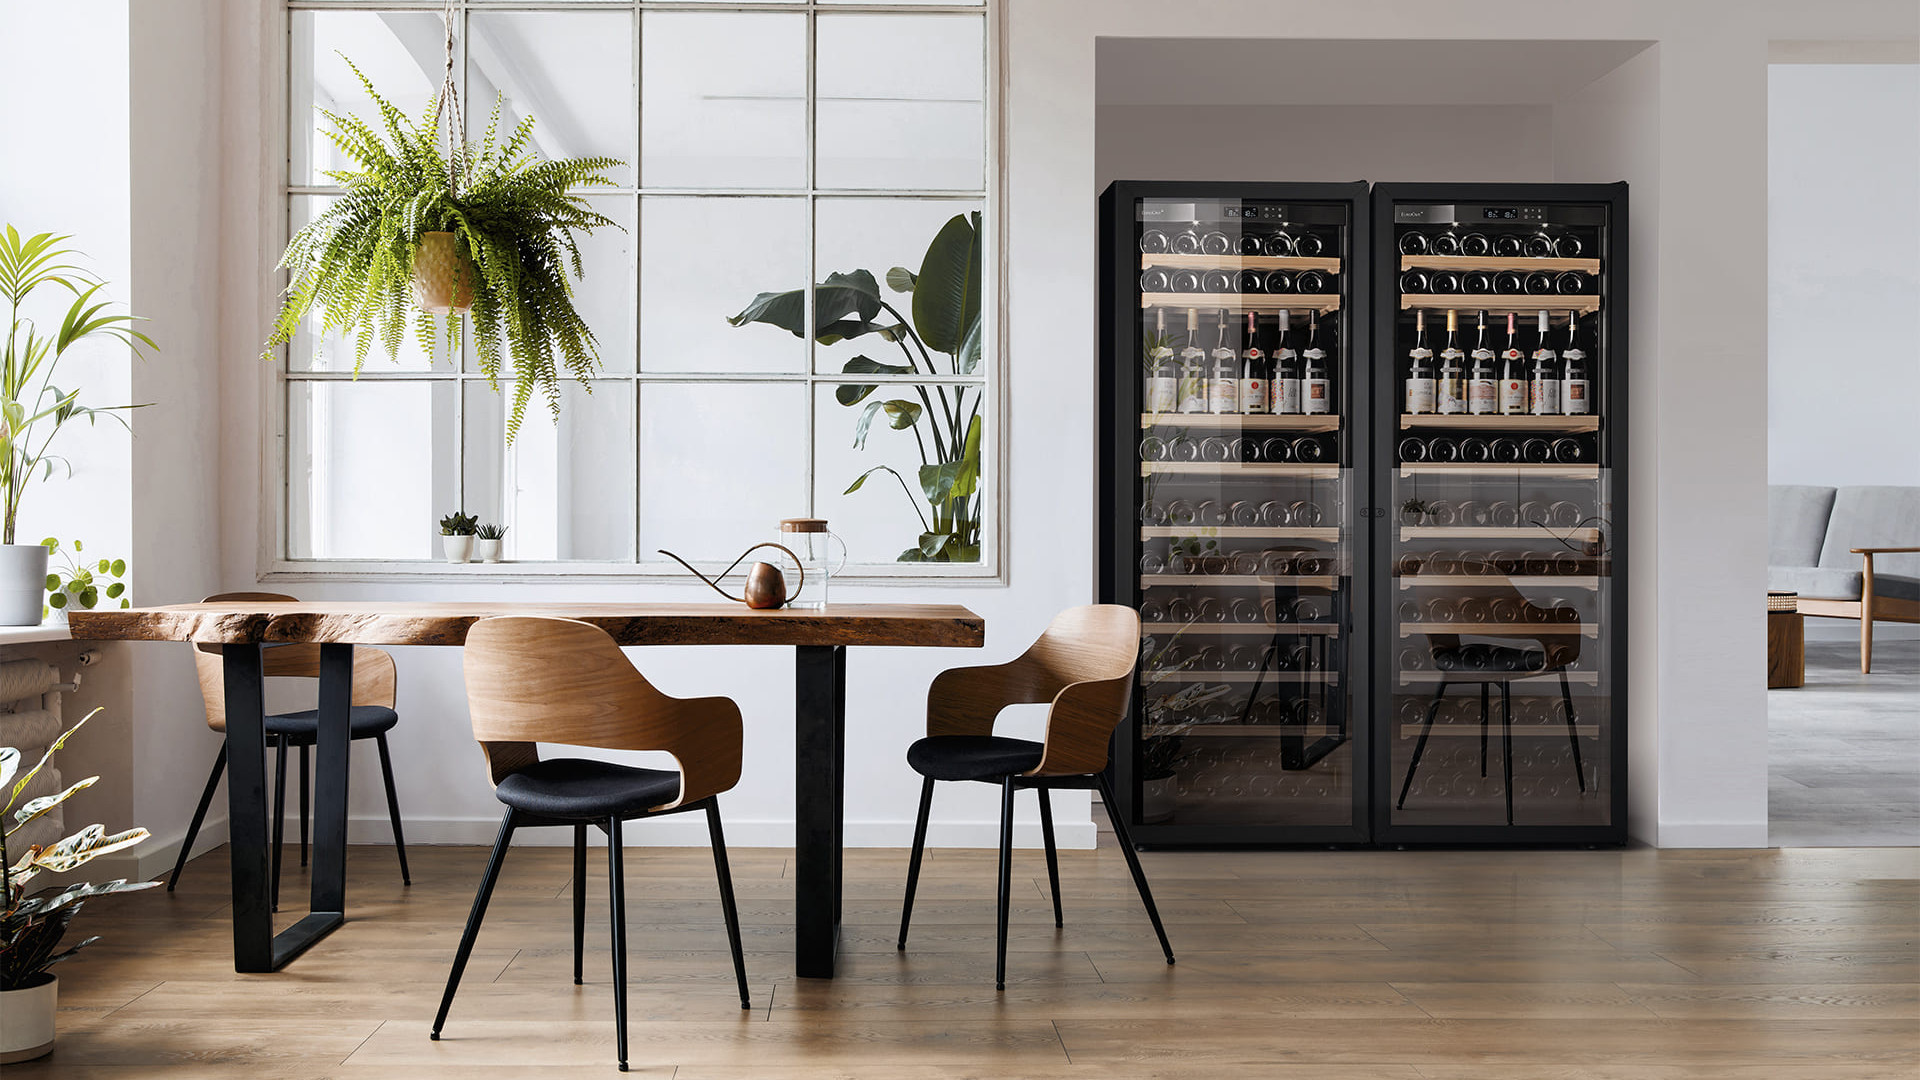 To increase your apartment's wine storage capacity, a good idea is to install 2 wine coolers side by side in your living room, cellar, mancave or garage.